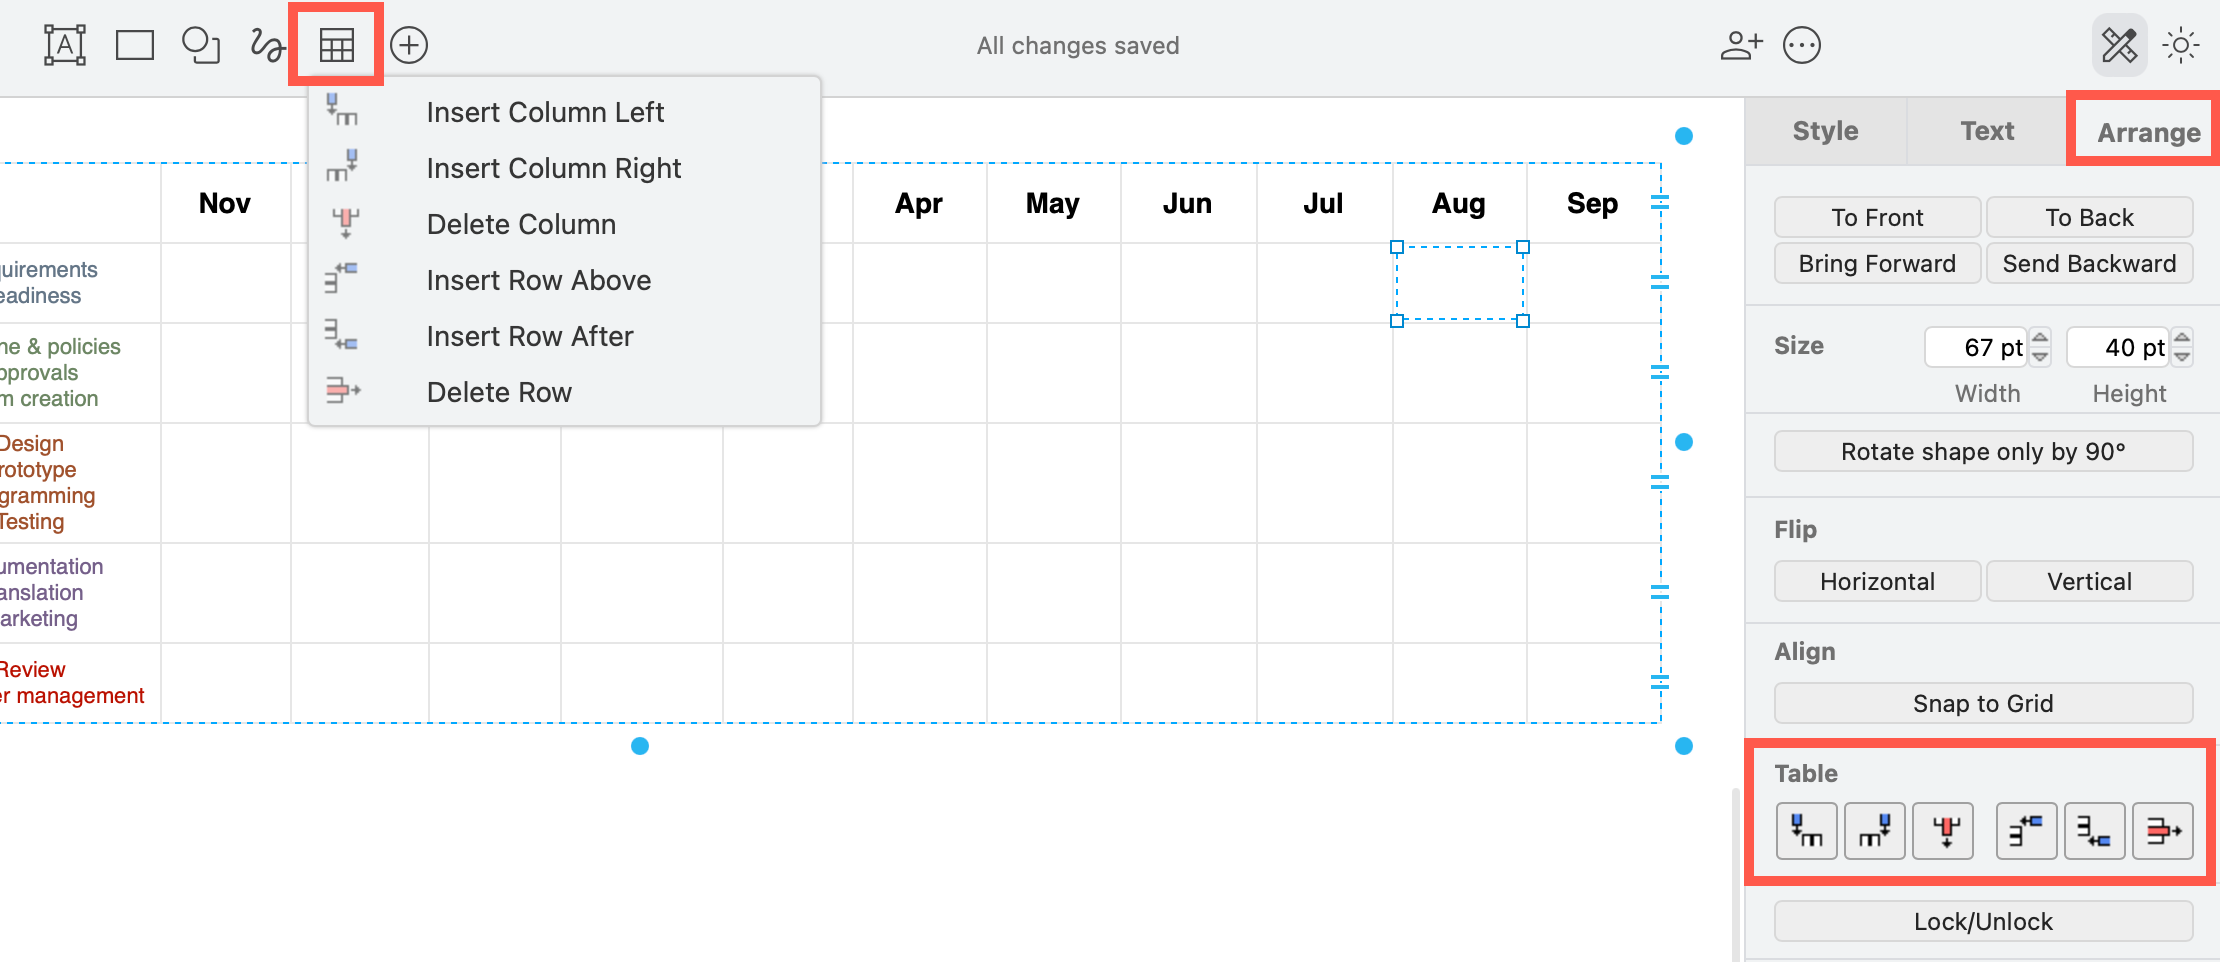 Use the table tools to add or remove rows and columns in your Gantt chart